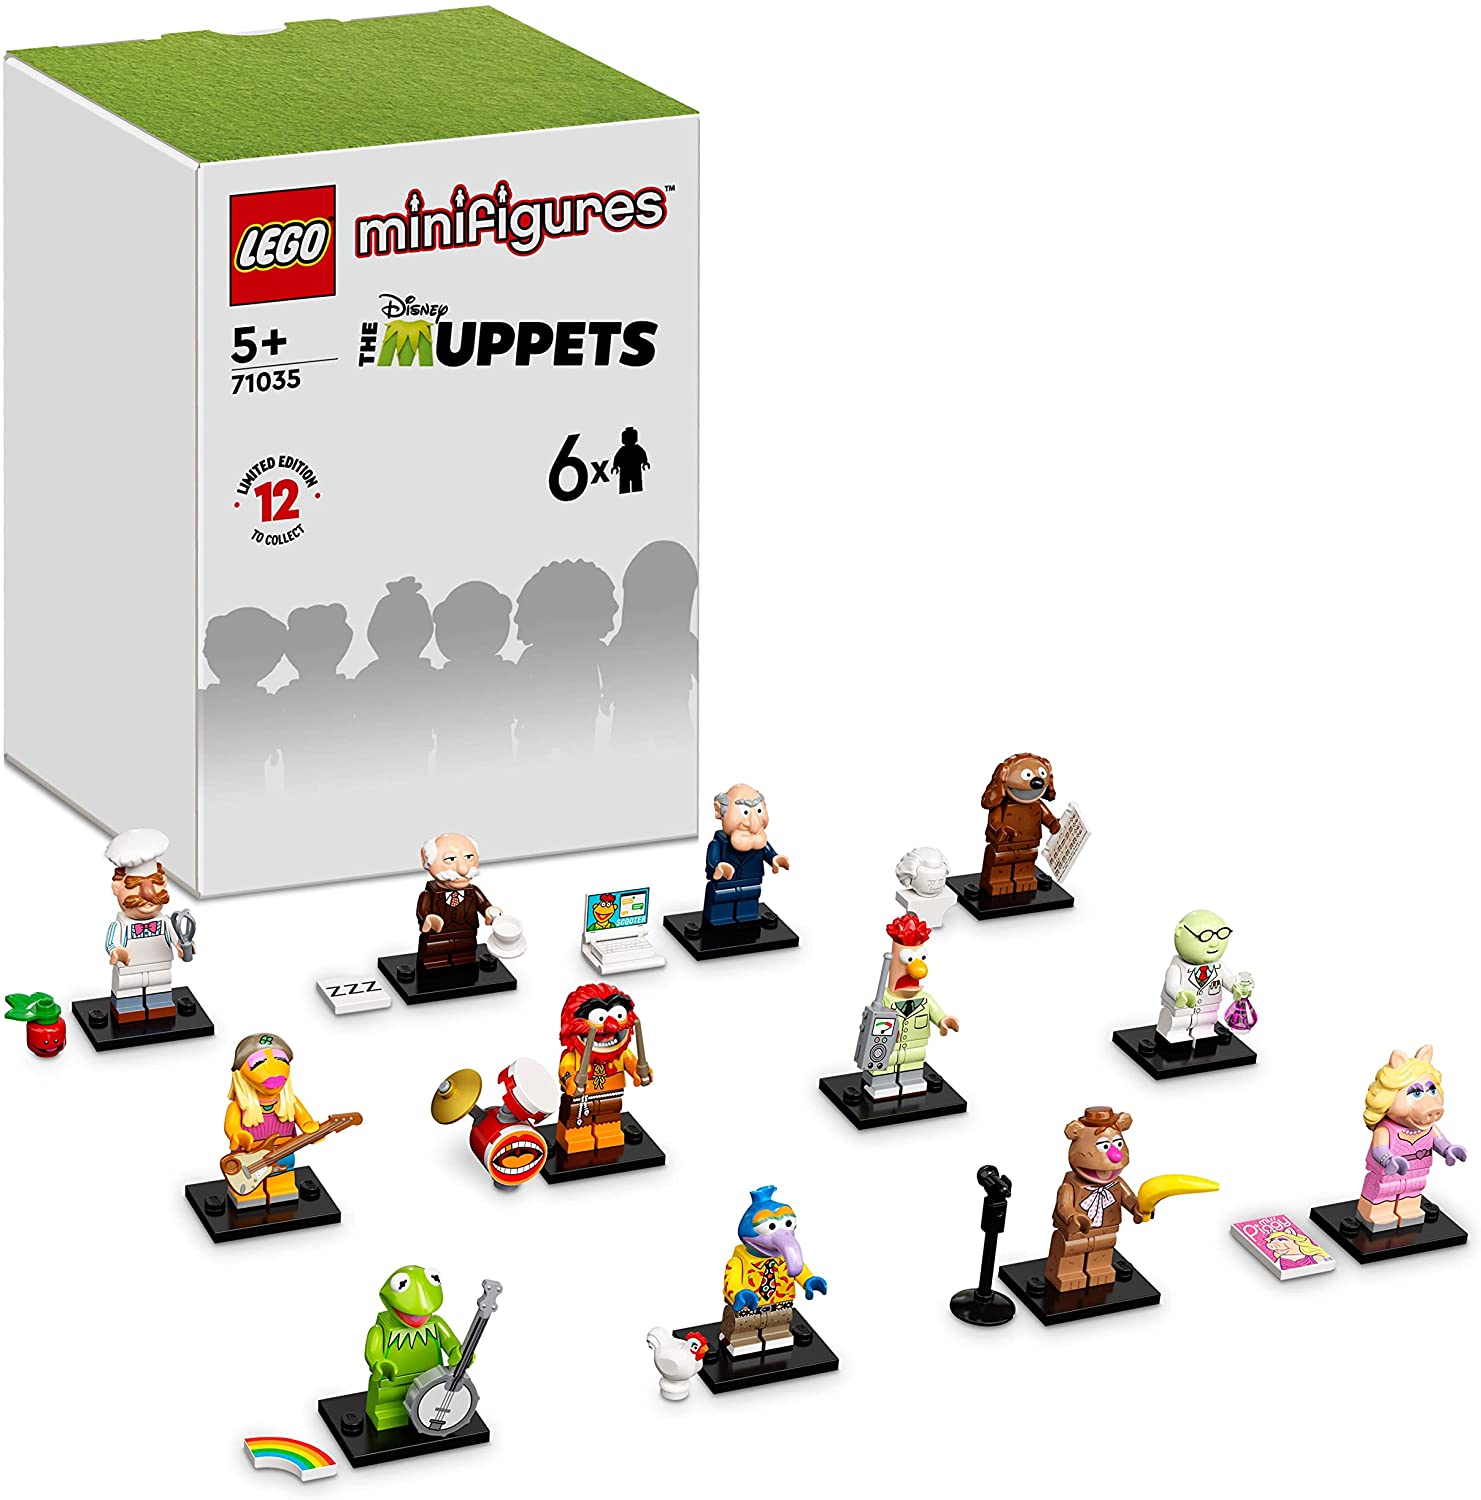 LEGO 71035 Mini Figures The Muppets - Pack of 6, including Kermit the Frog and Miss Piggy, Muppets Show Limited Edition